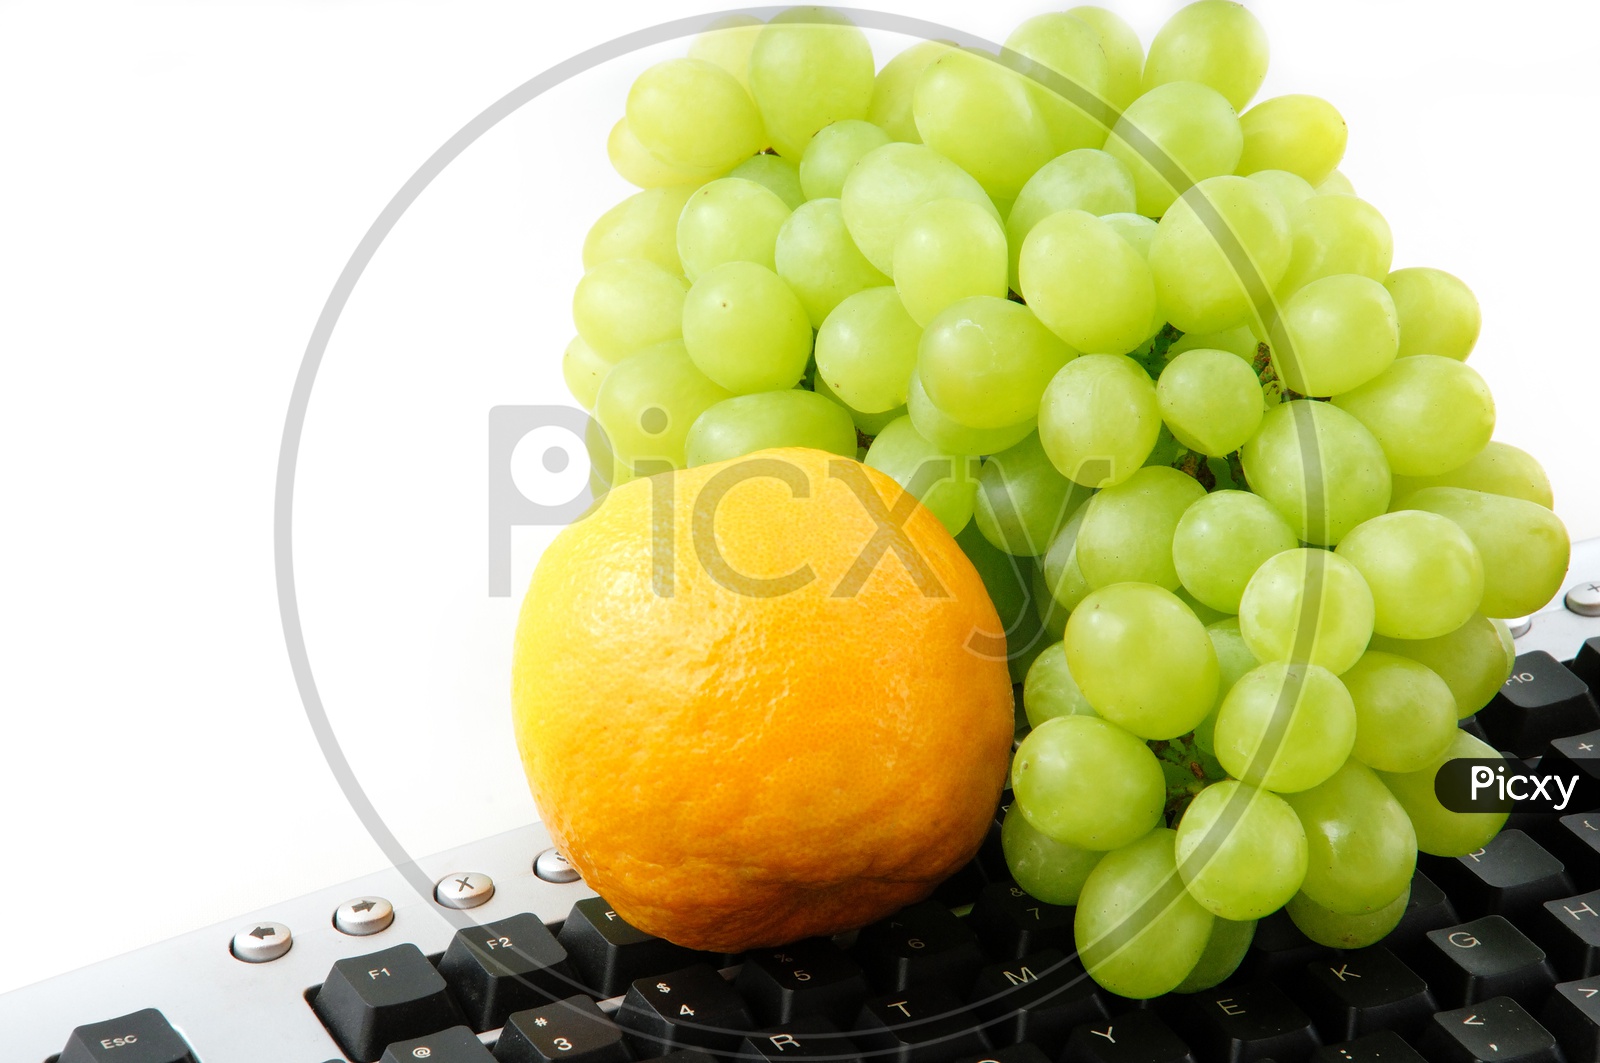 Grapes and Oranges on the key board